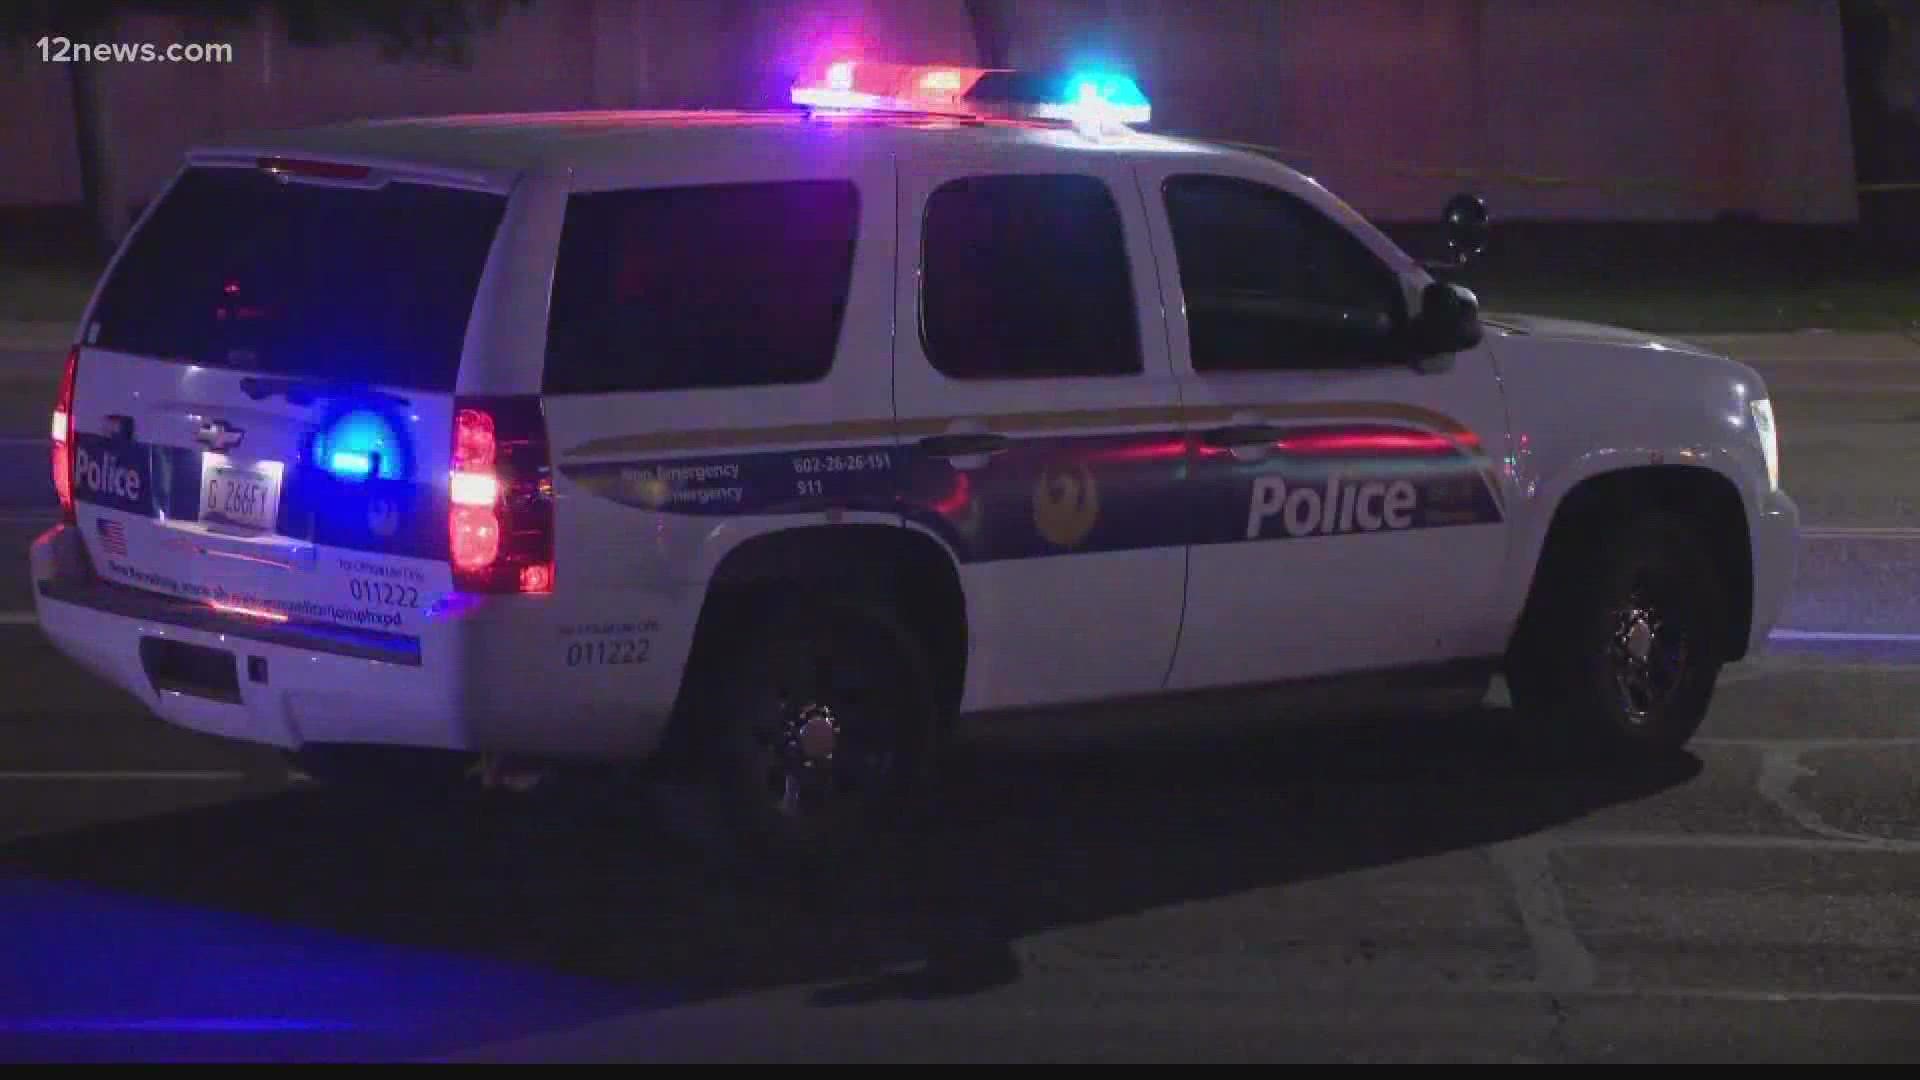 This investigation will assess all types of use of force by Phoenix Police officers, including deadly force, the Department of Justice announced Thursday.